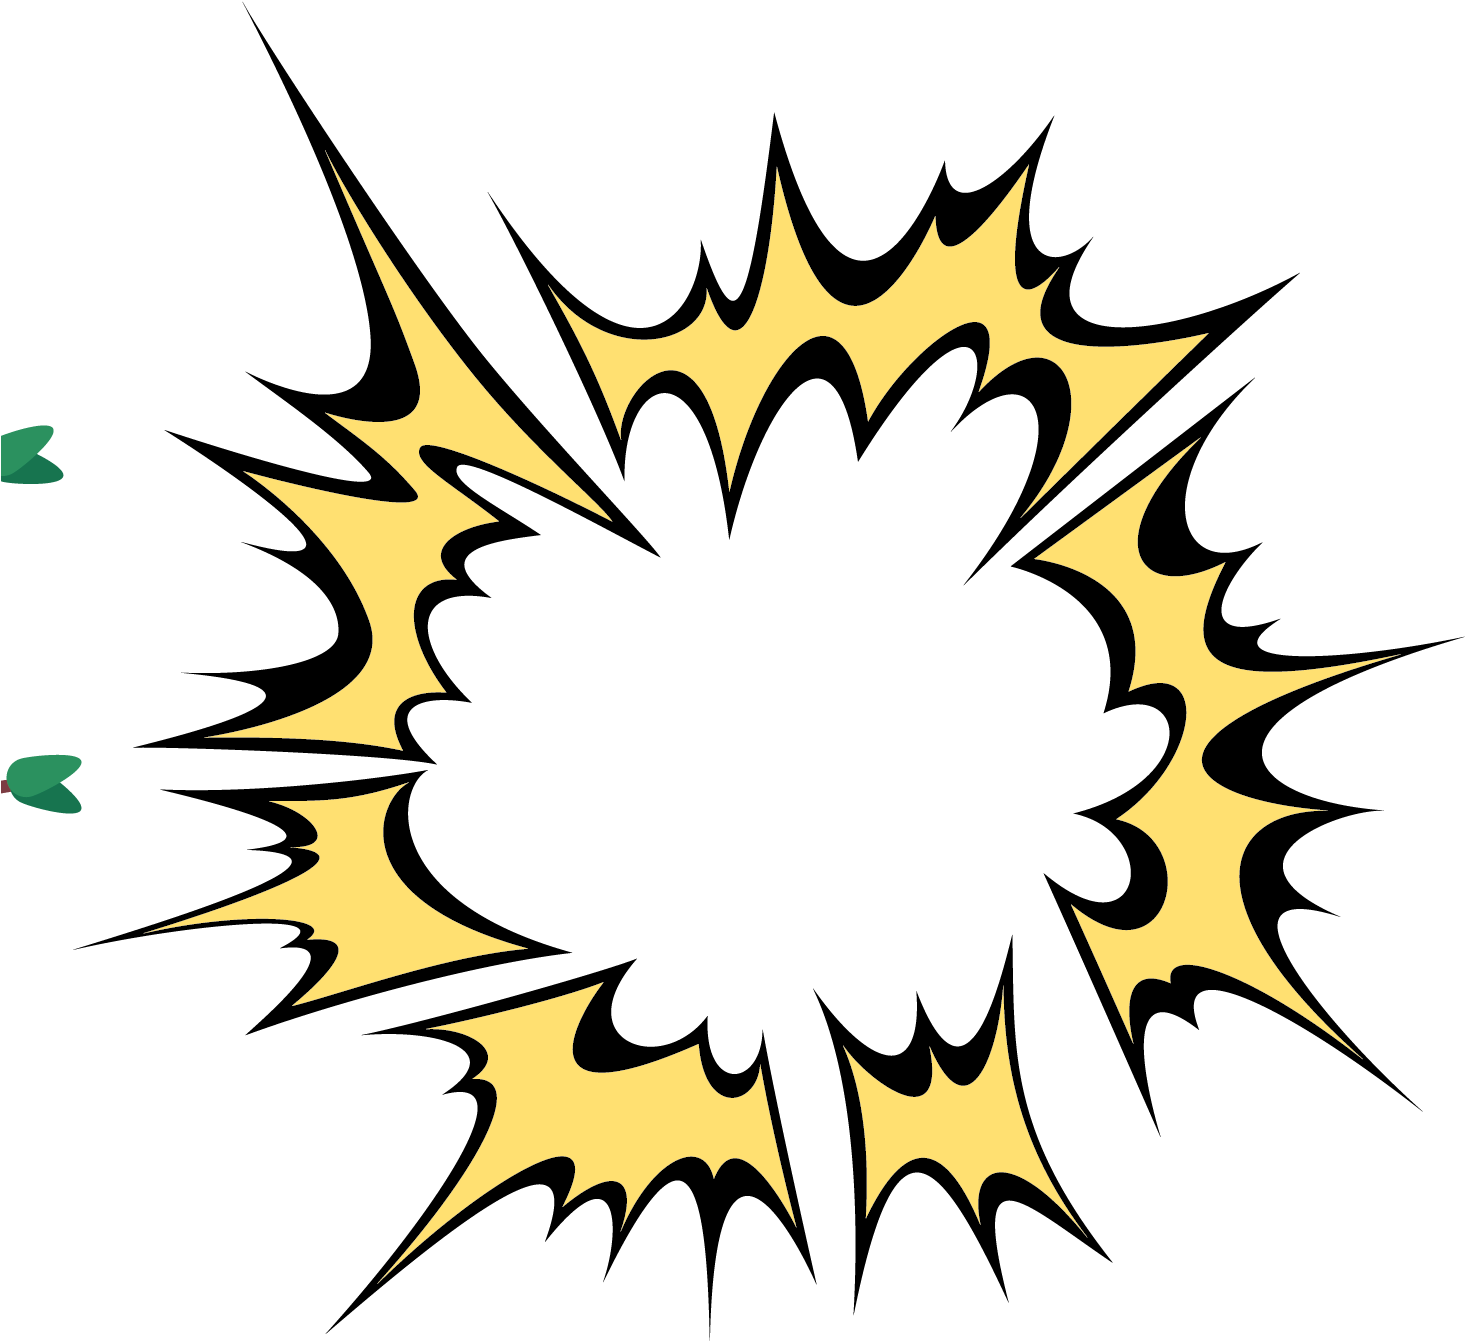 Comic Explosion PNG Picture